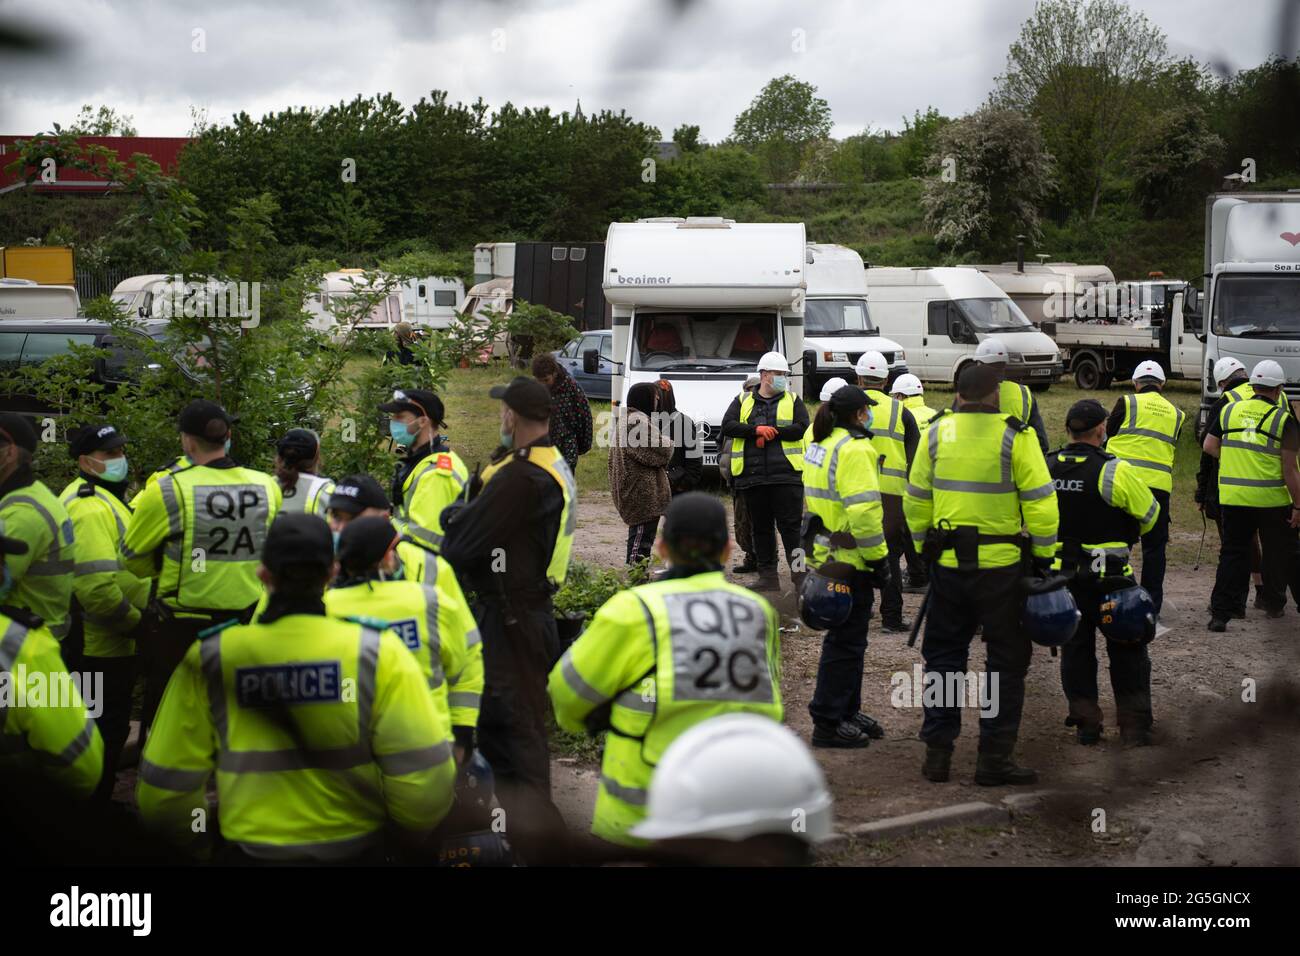 Eastville, Bristol, UK. 20th May 2021. Scores of police and bailiffs have surrounded a traveller encampment in Bristol to evict occupiers. Stock Photo